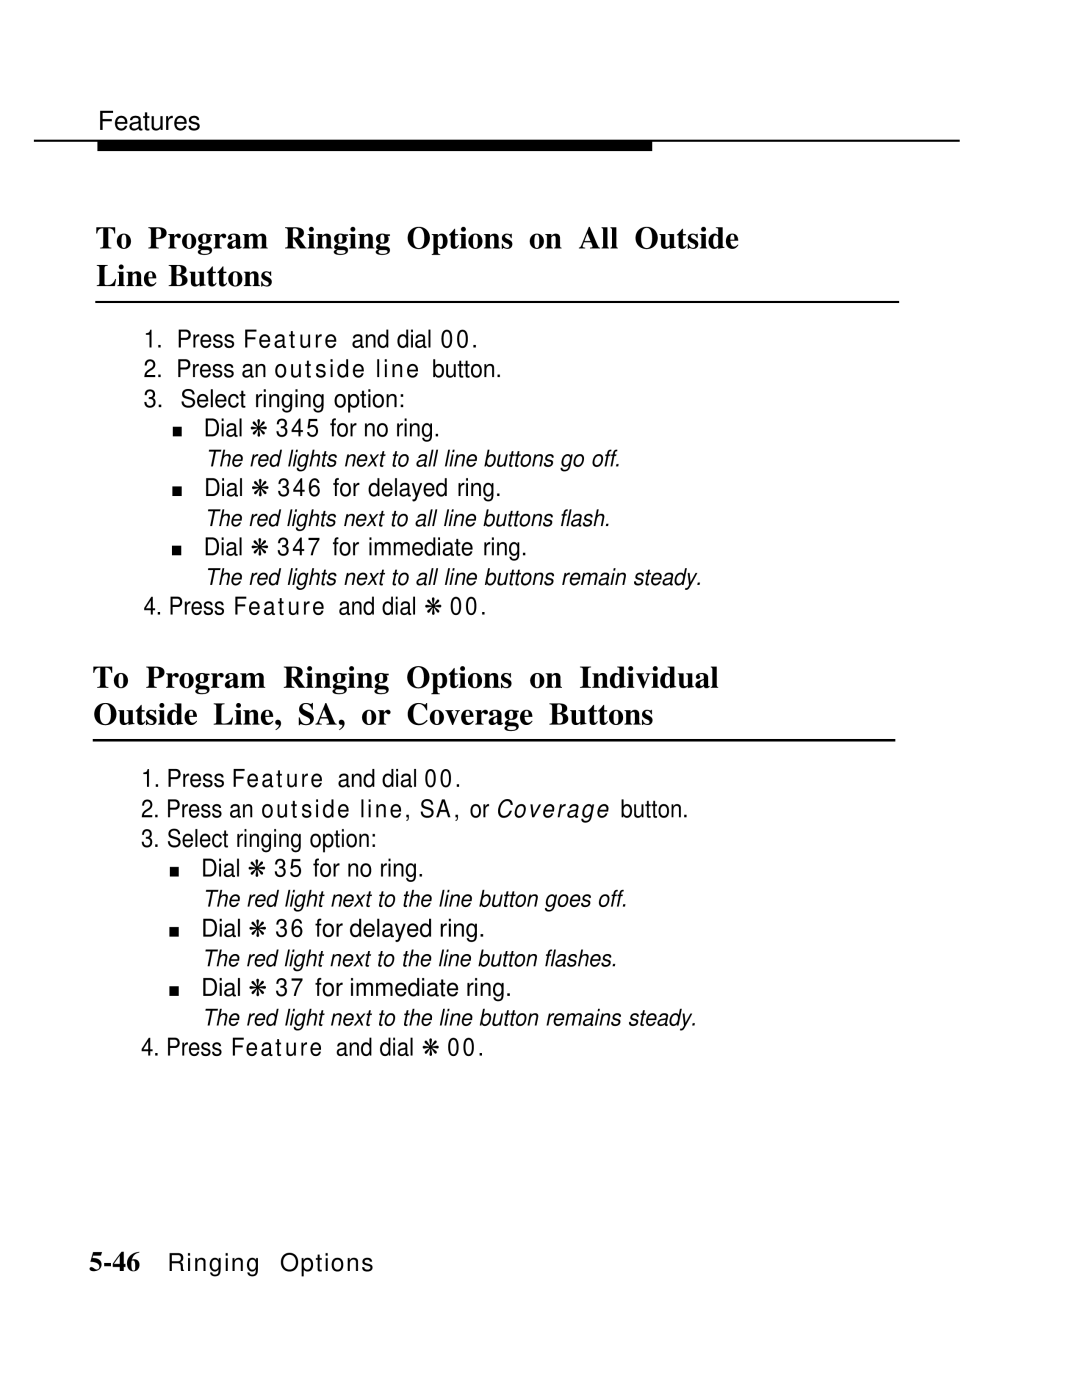 AT&T MLX-10 manual To Program Ringing Options on All Outside Line Buttons 